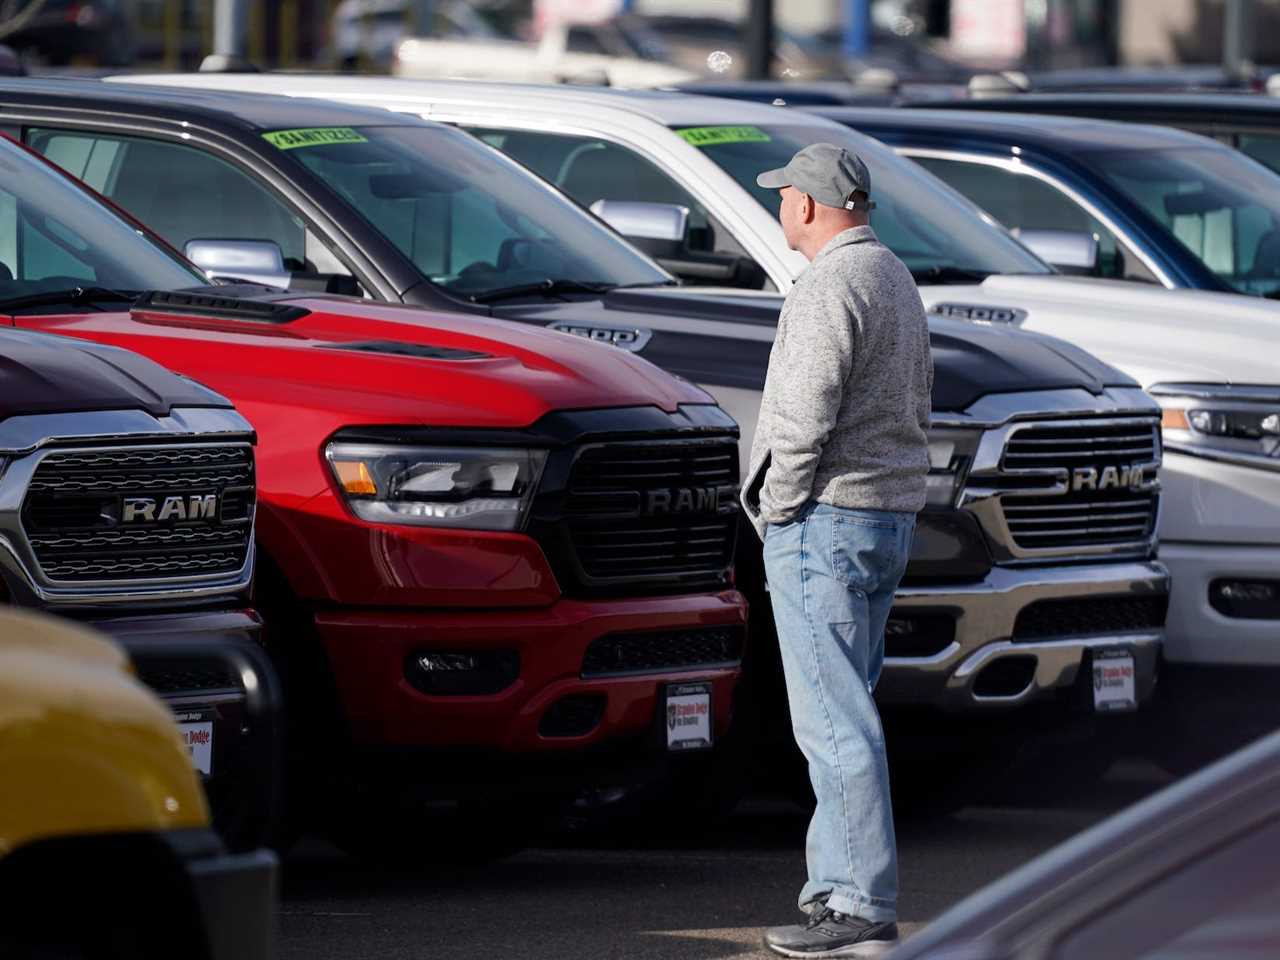 A man wearing a hat looks at cars on a dealership lot.